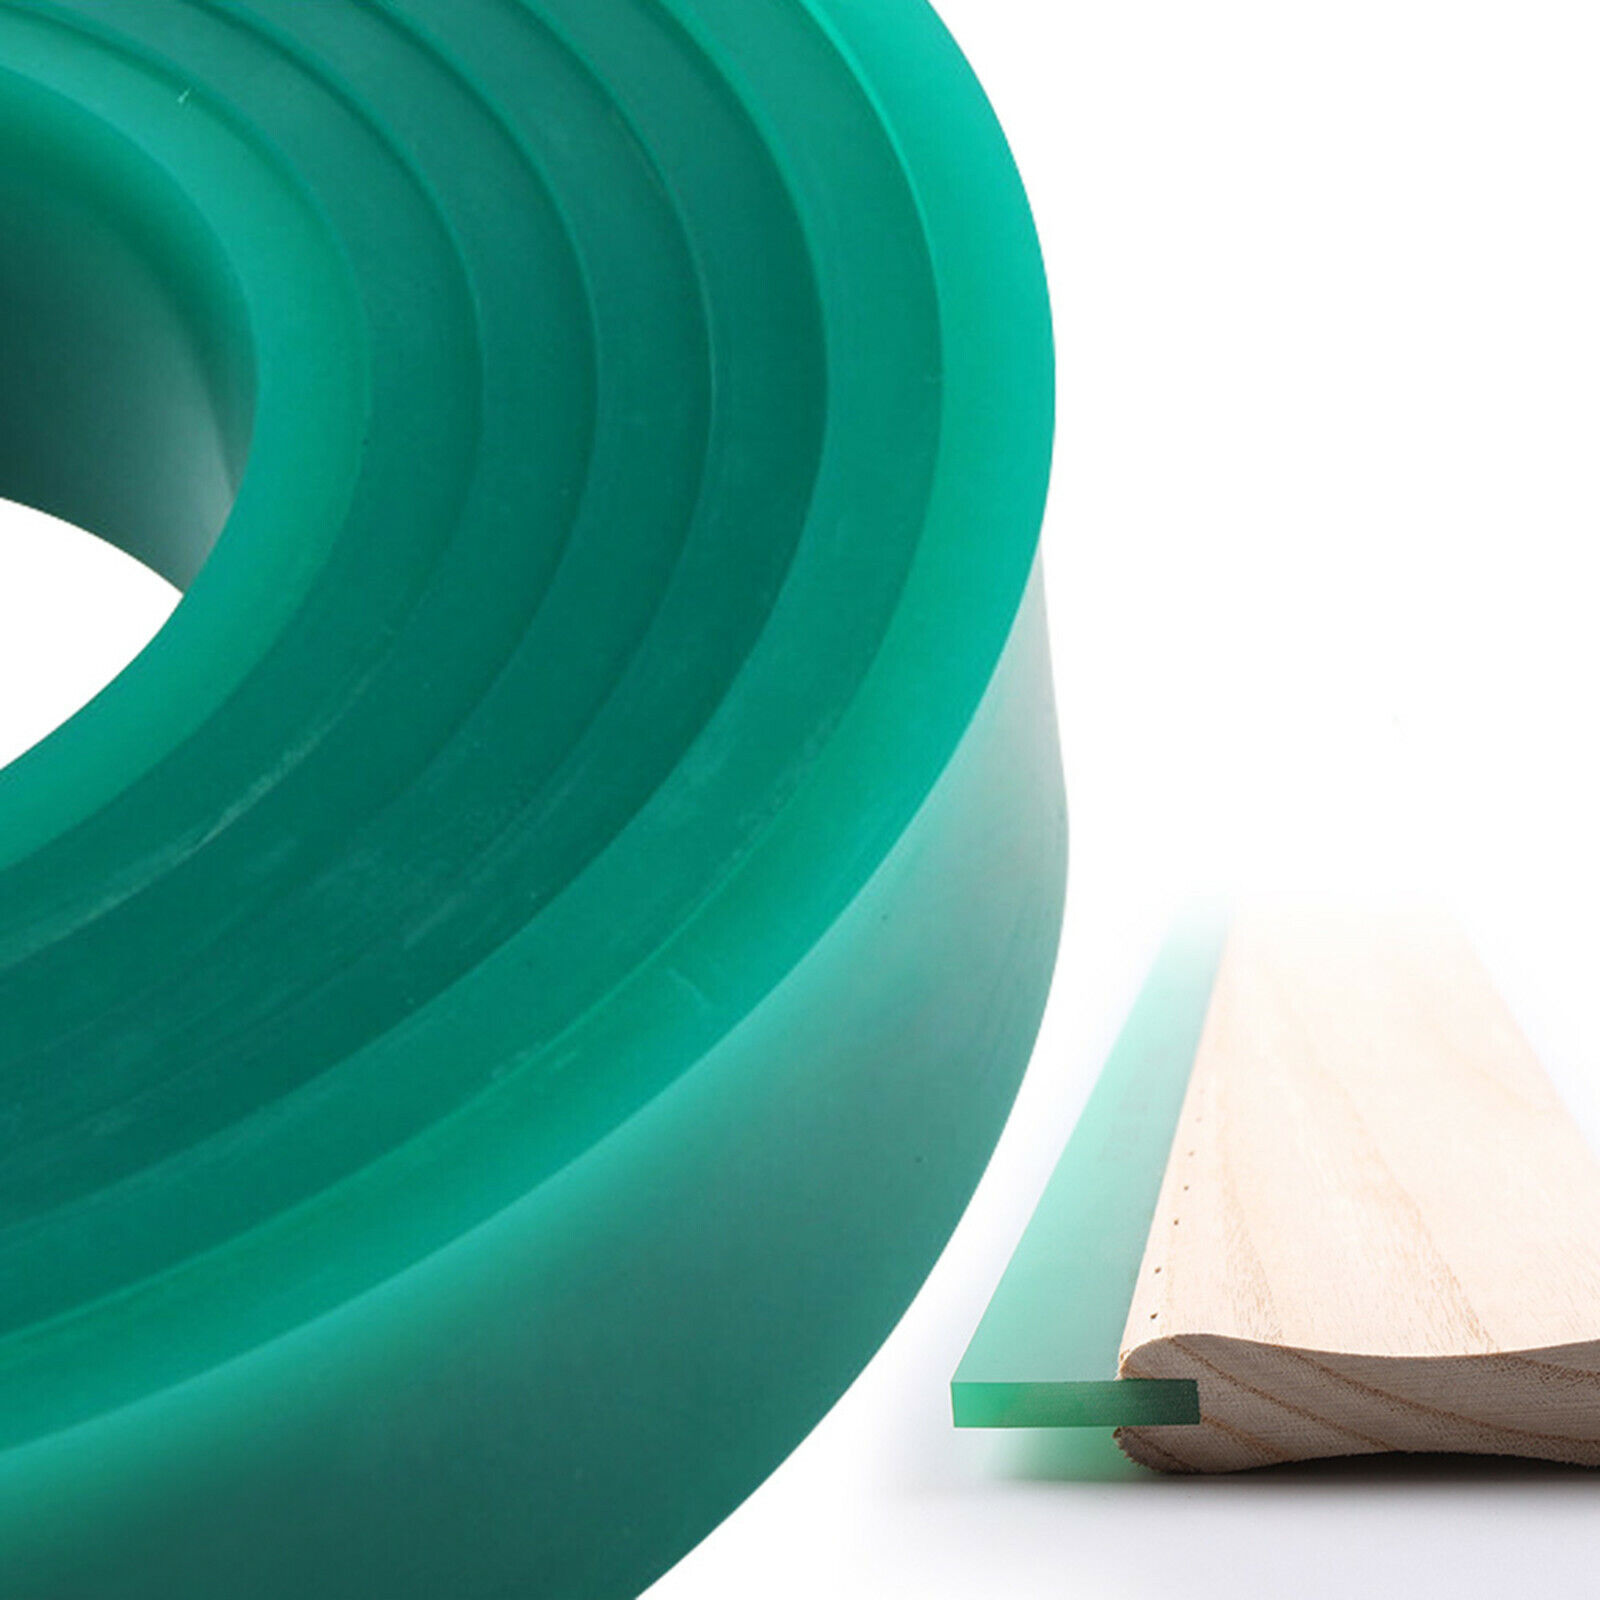 80 DURO 6FT 72" Silk Screen Printing Squeegee Blade Polyurethane Rubber Green Unbranded Does Not Apply - фотография #5